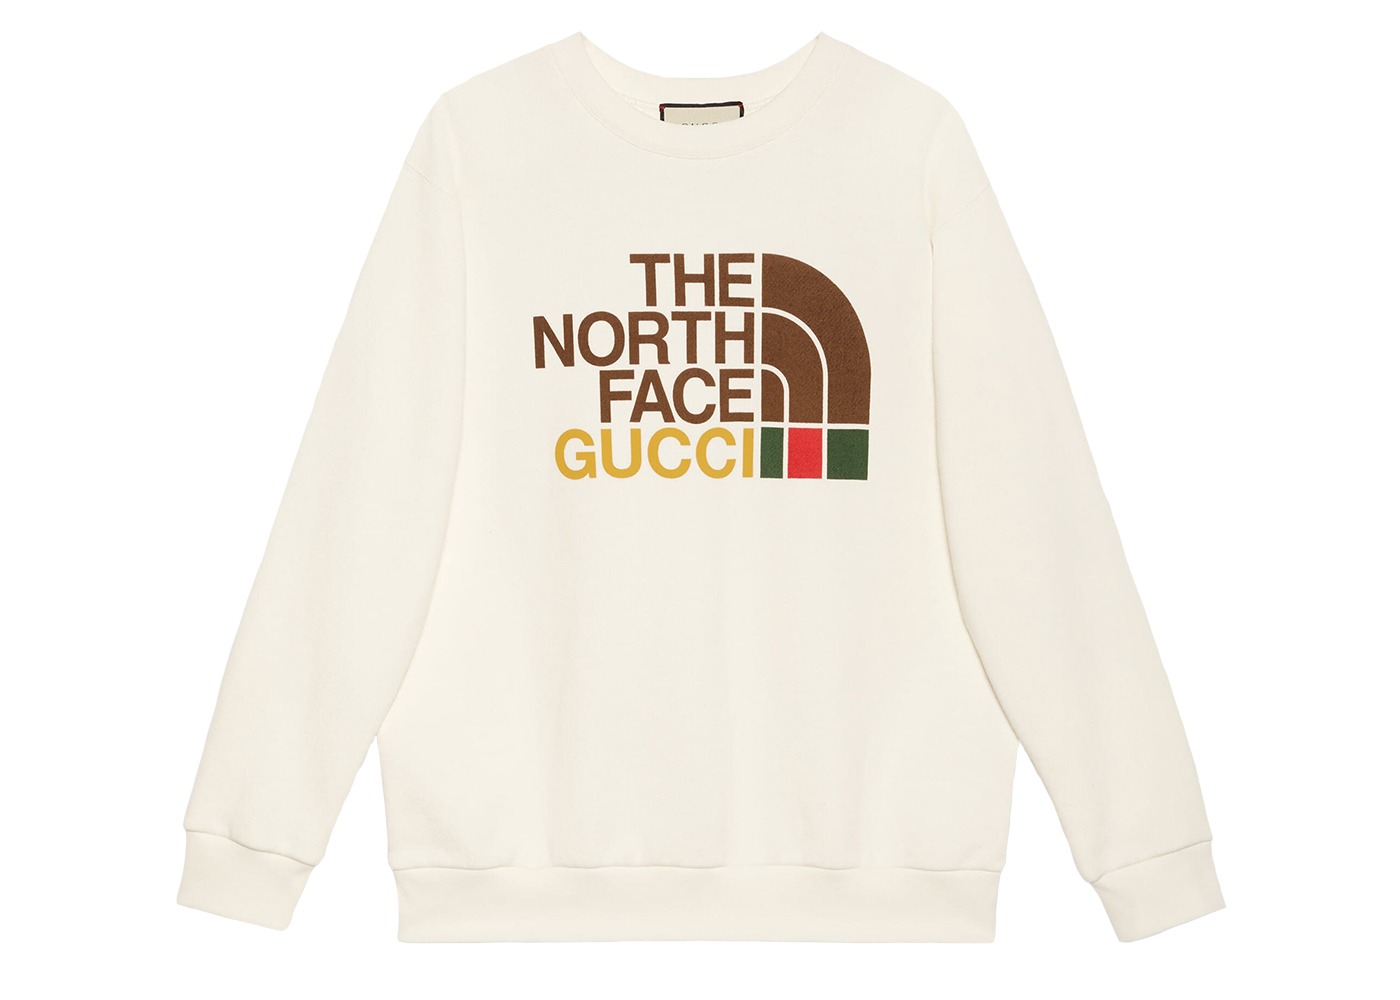 Gucci x The North Face Womens Cotton Oversized Sweatshirt White - US